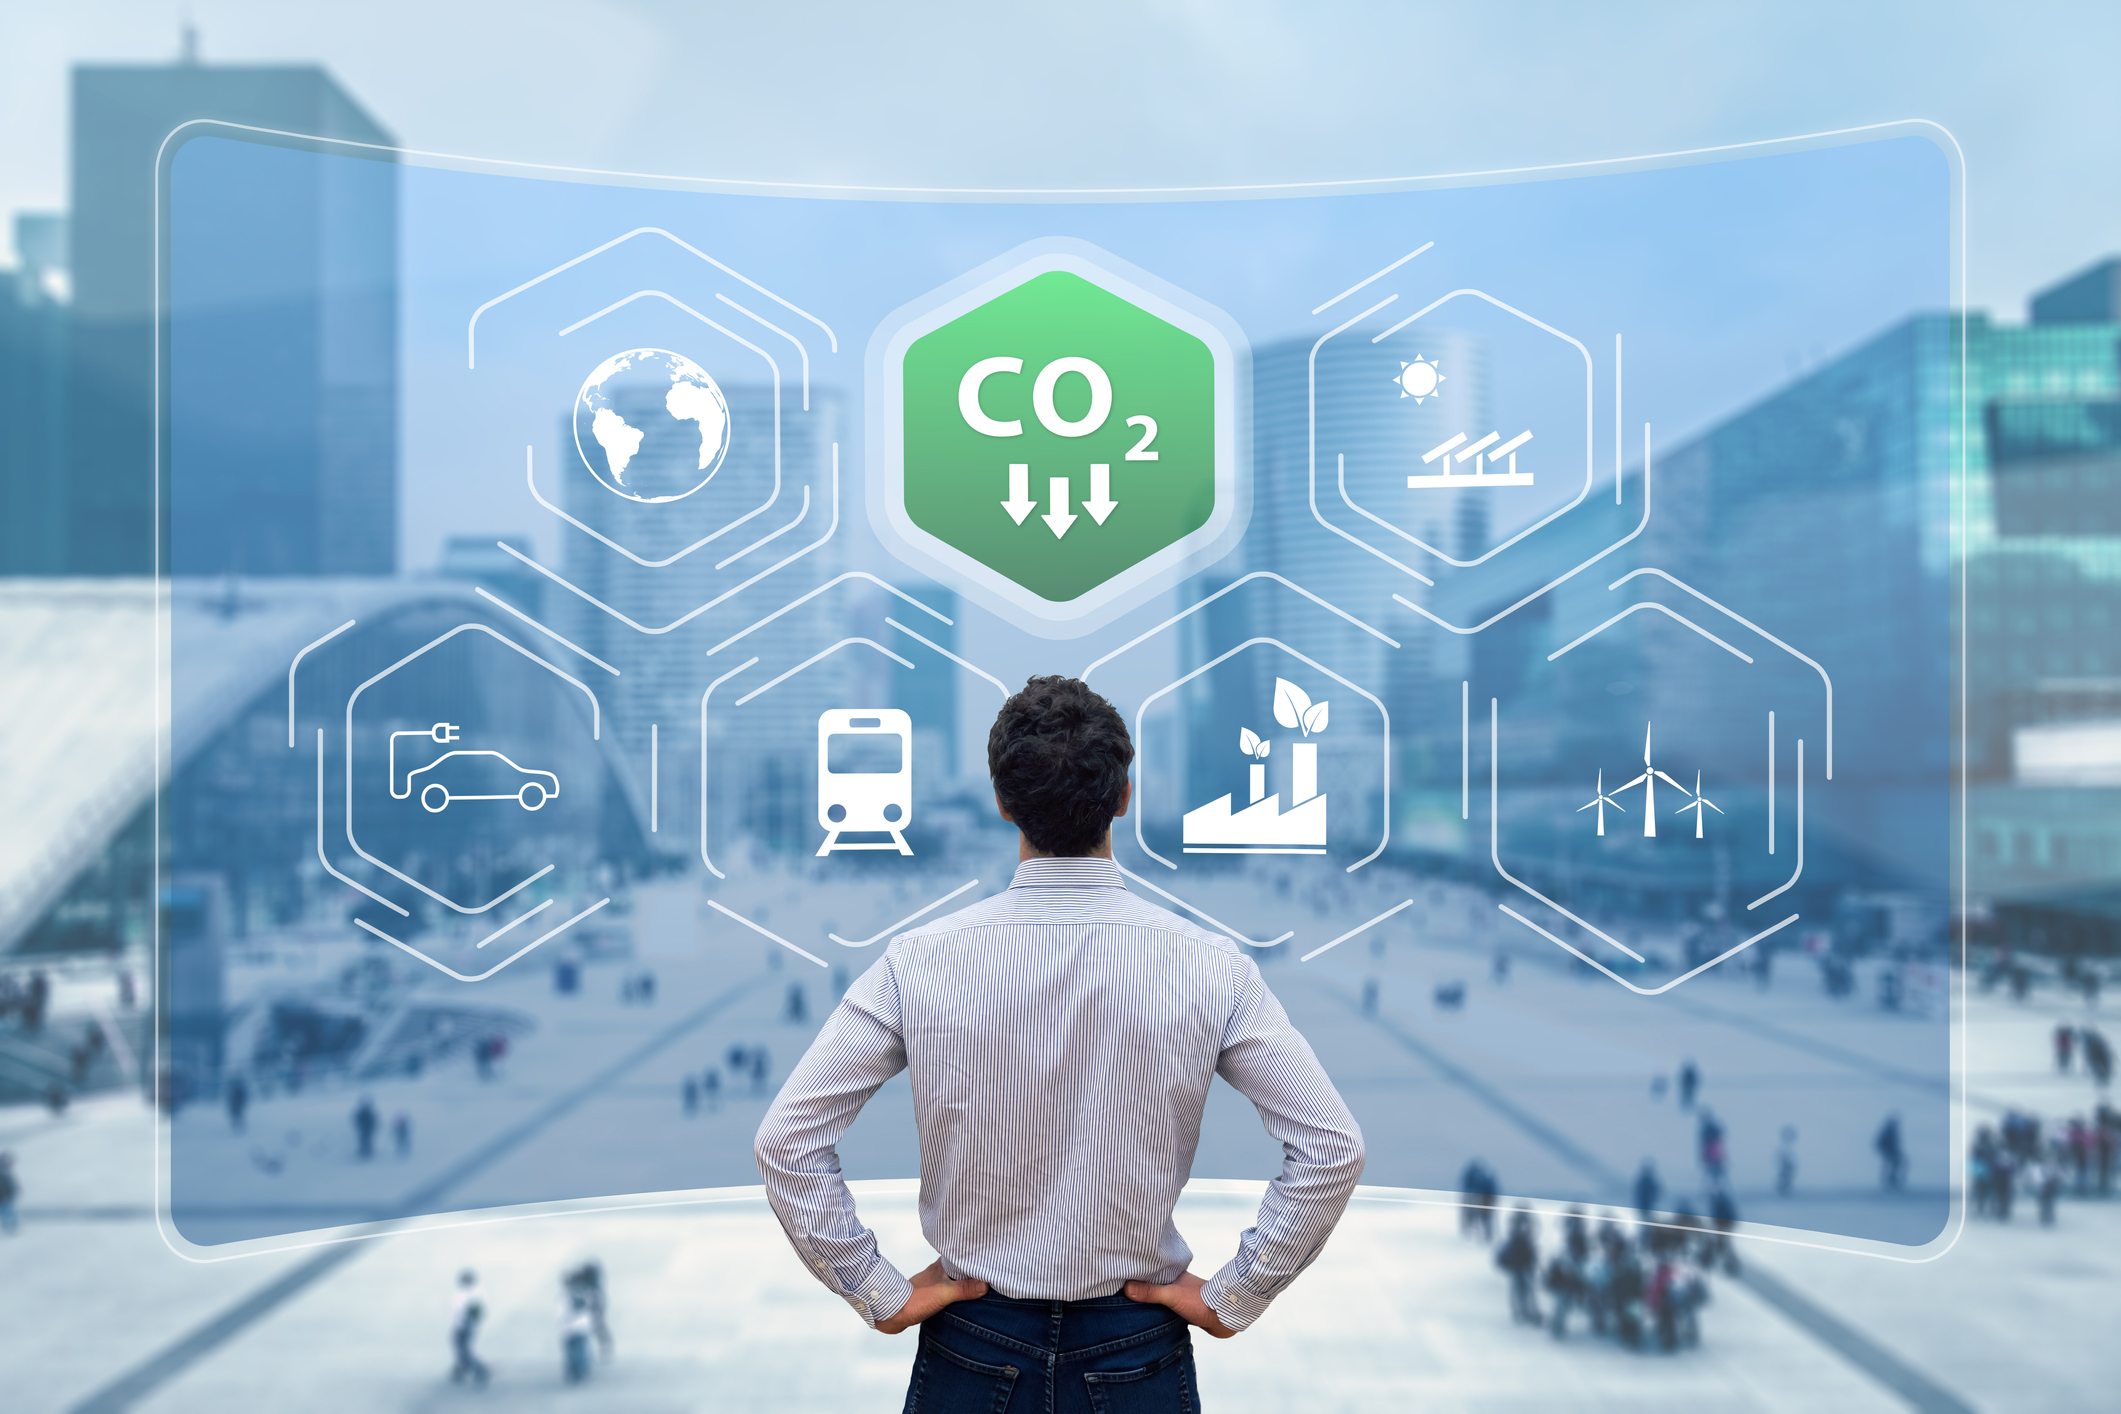 SAP solution for sustainability and carbon footprint measurement